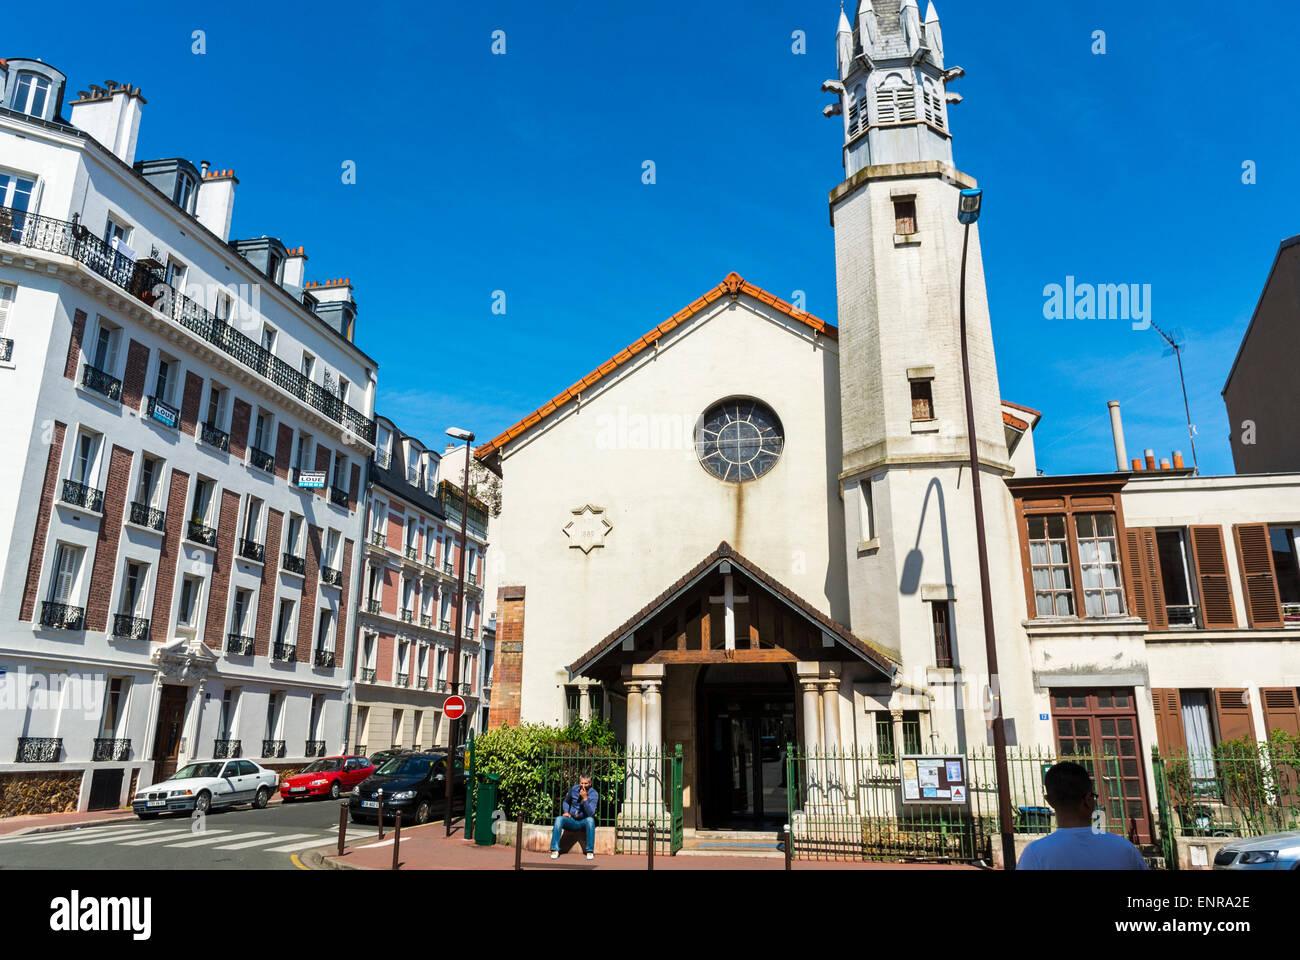 Paris, France, Charenton-Le-Pont, Suburbs, Street Scenes, Protestant Church, French Real Estate, Residential Buildings Stock Photo